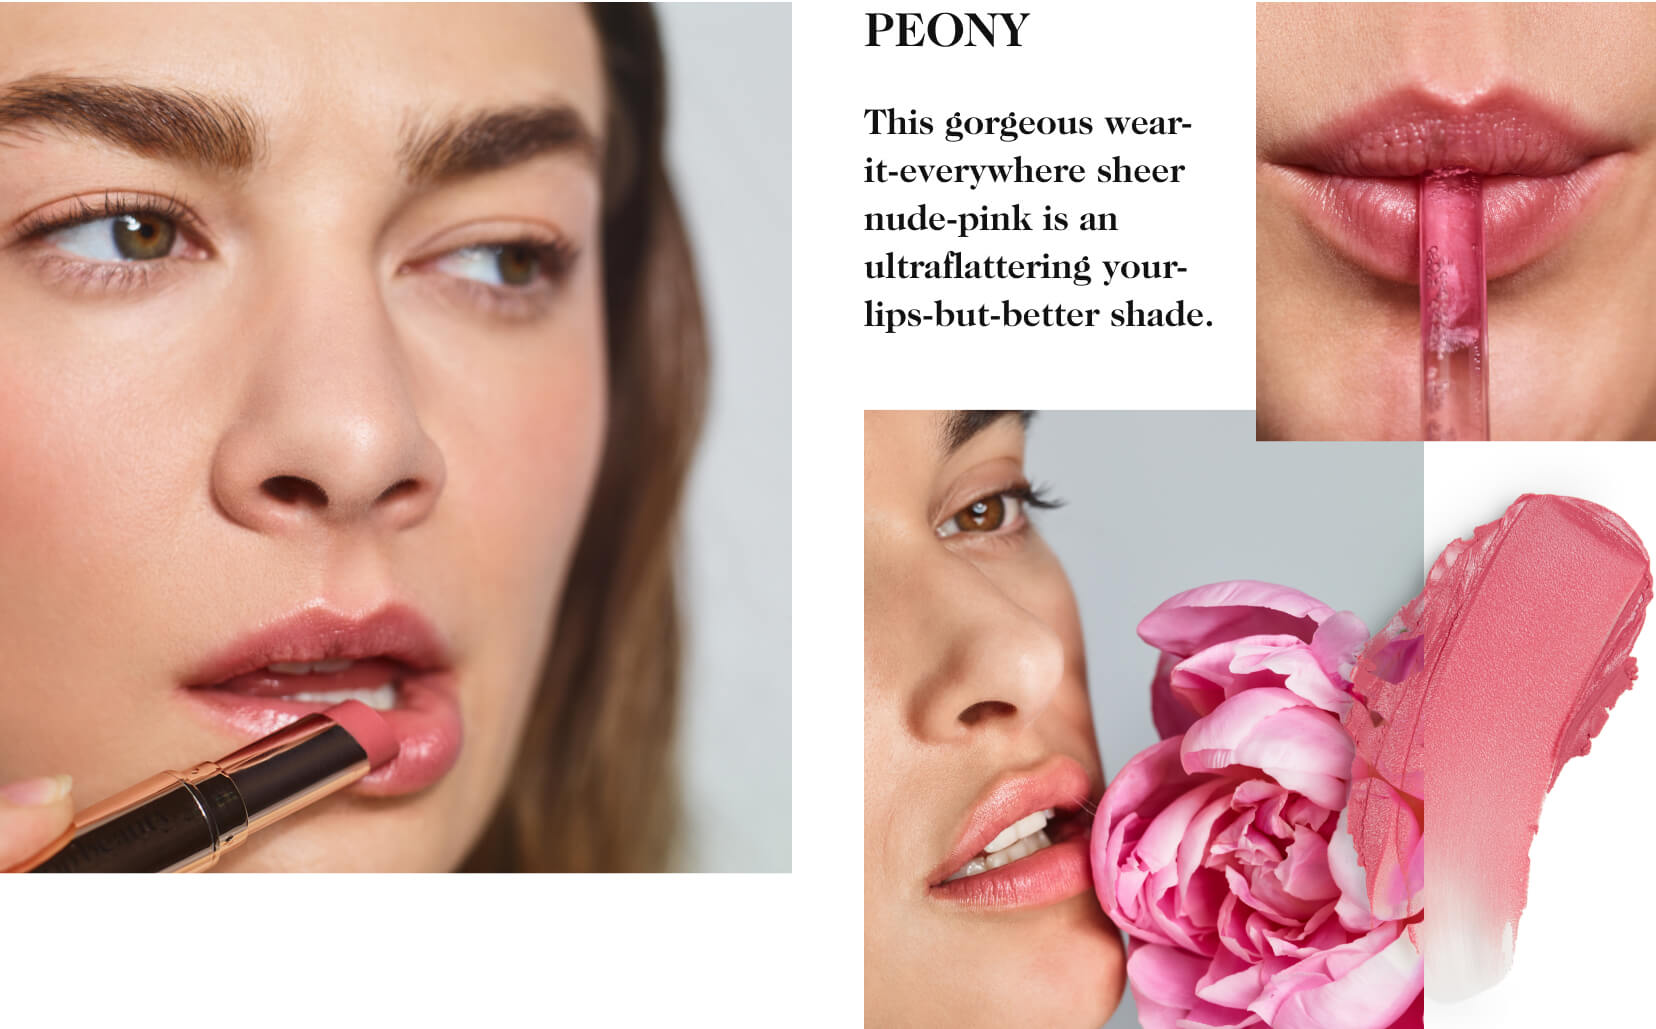 Peony - This gorgeous wear-it-everywhere sheer ***-pink is an ultraflattering your-lips-but-better shade.